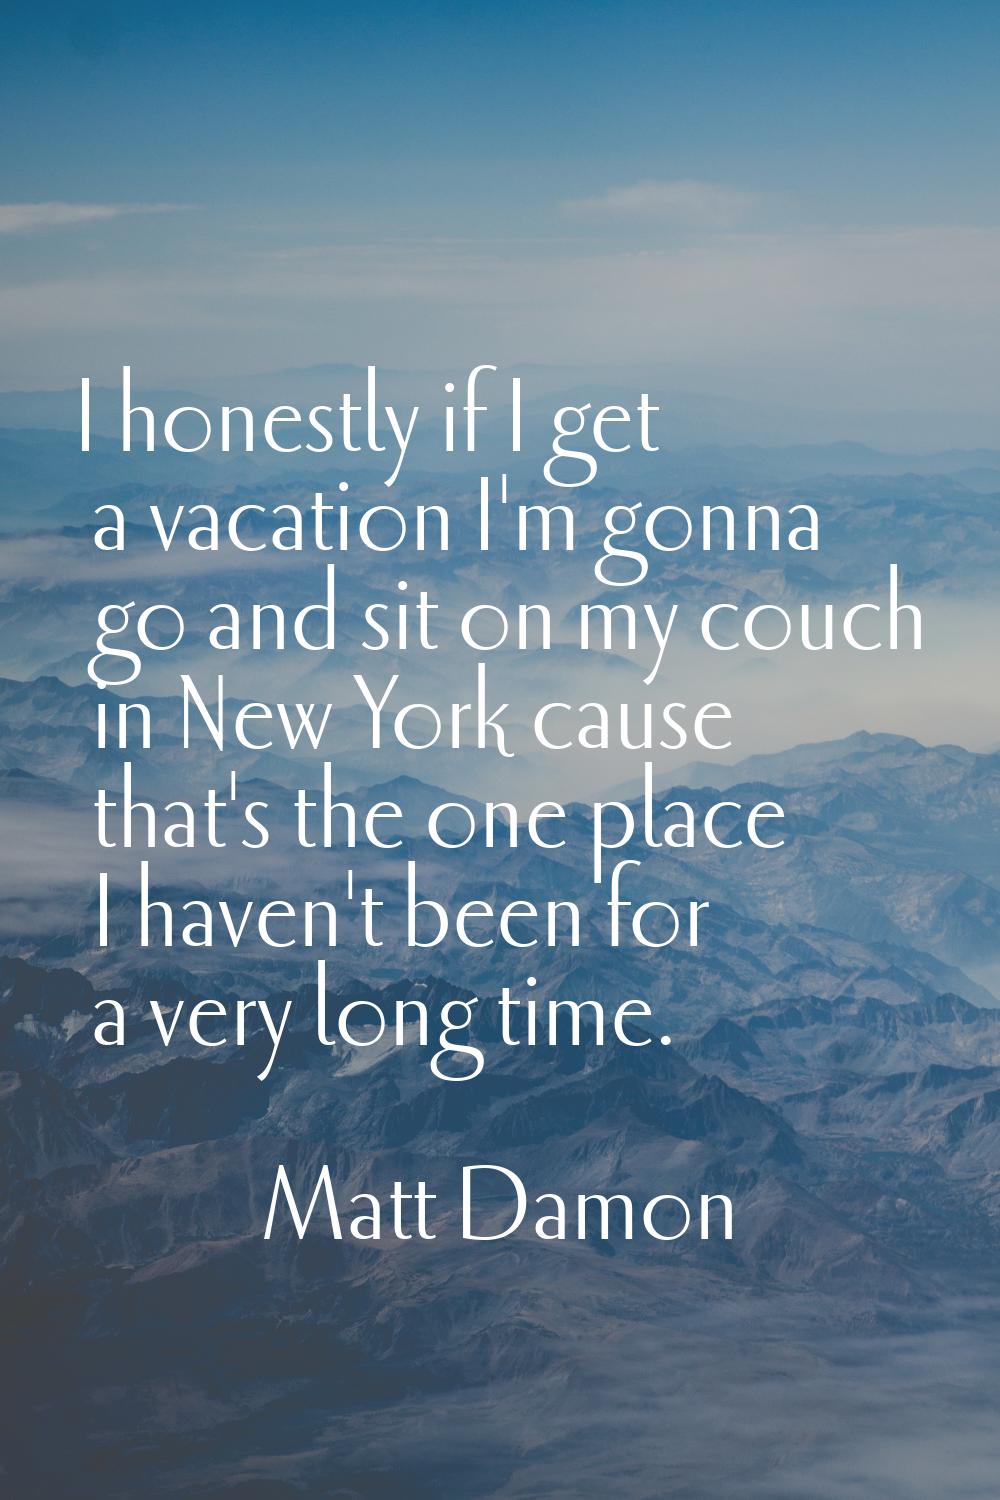 I honestly if I get a vacation I'm gonna go and sit on my couch in New York cause that's the one pl